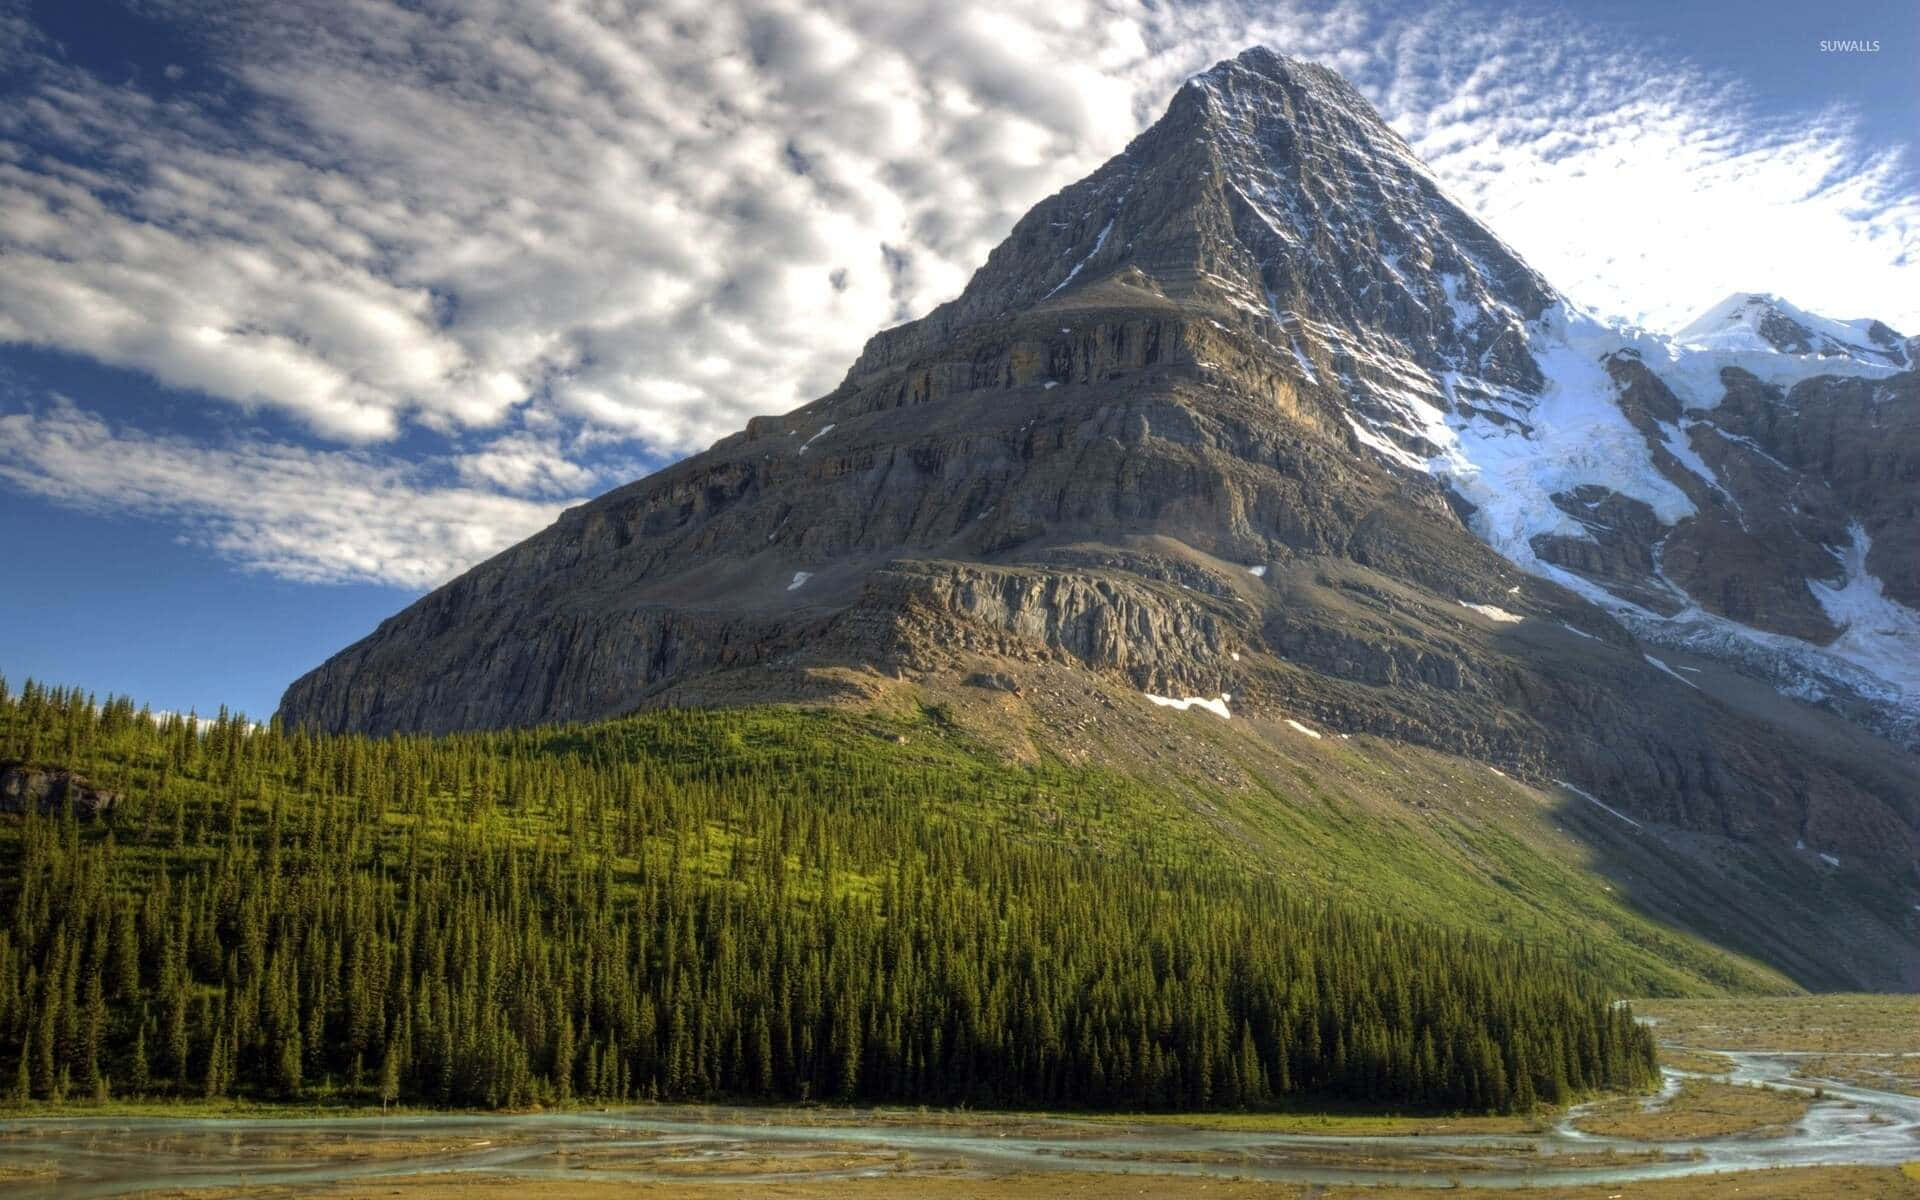 Majestic_ Mountain_ Peak_with_ Forest_and_ Clouds.jpg Wallpaper